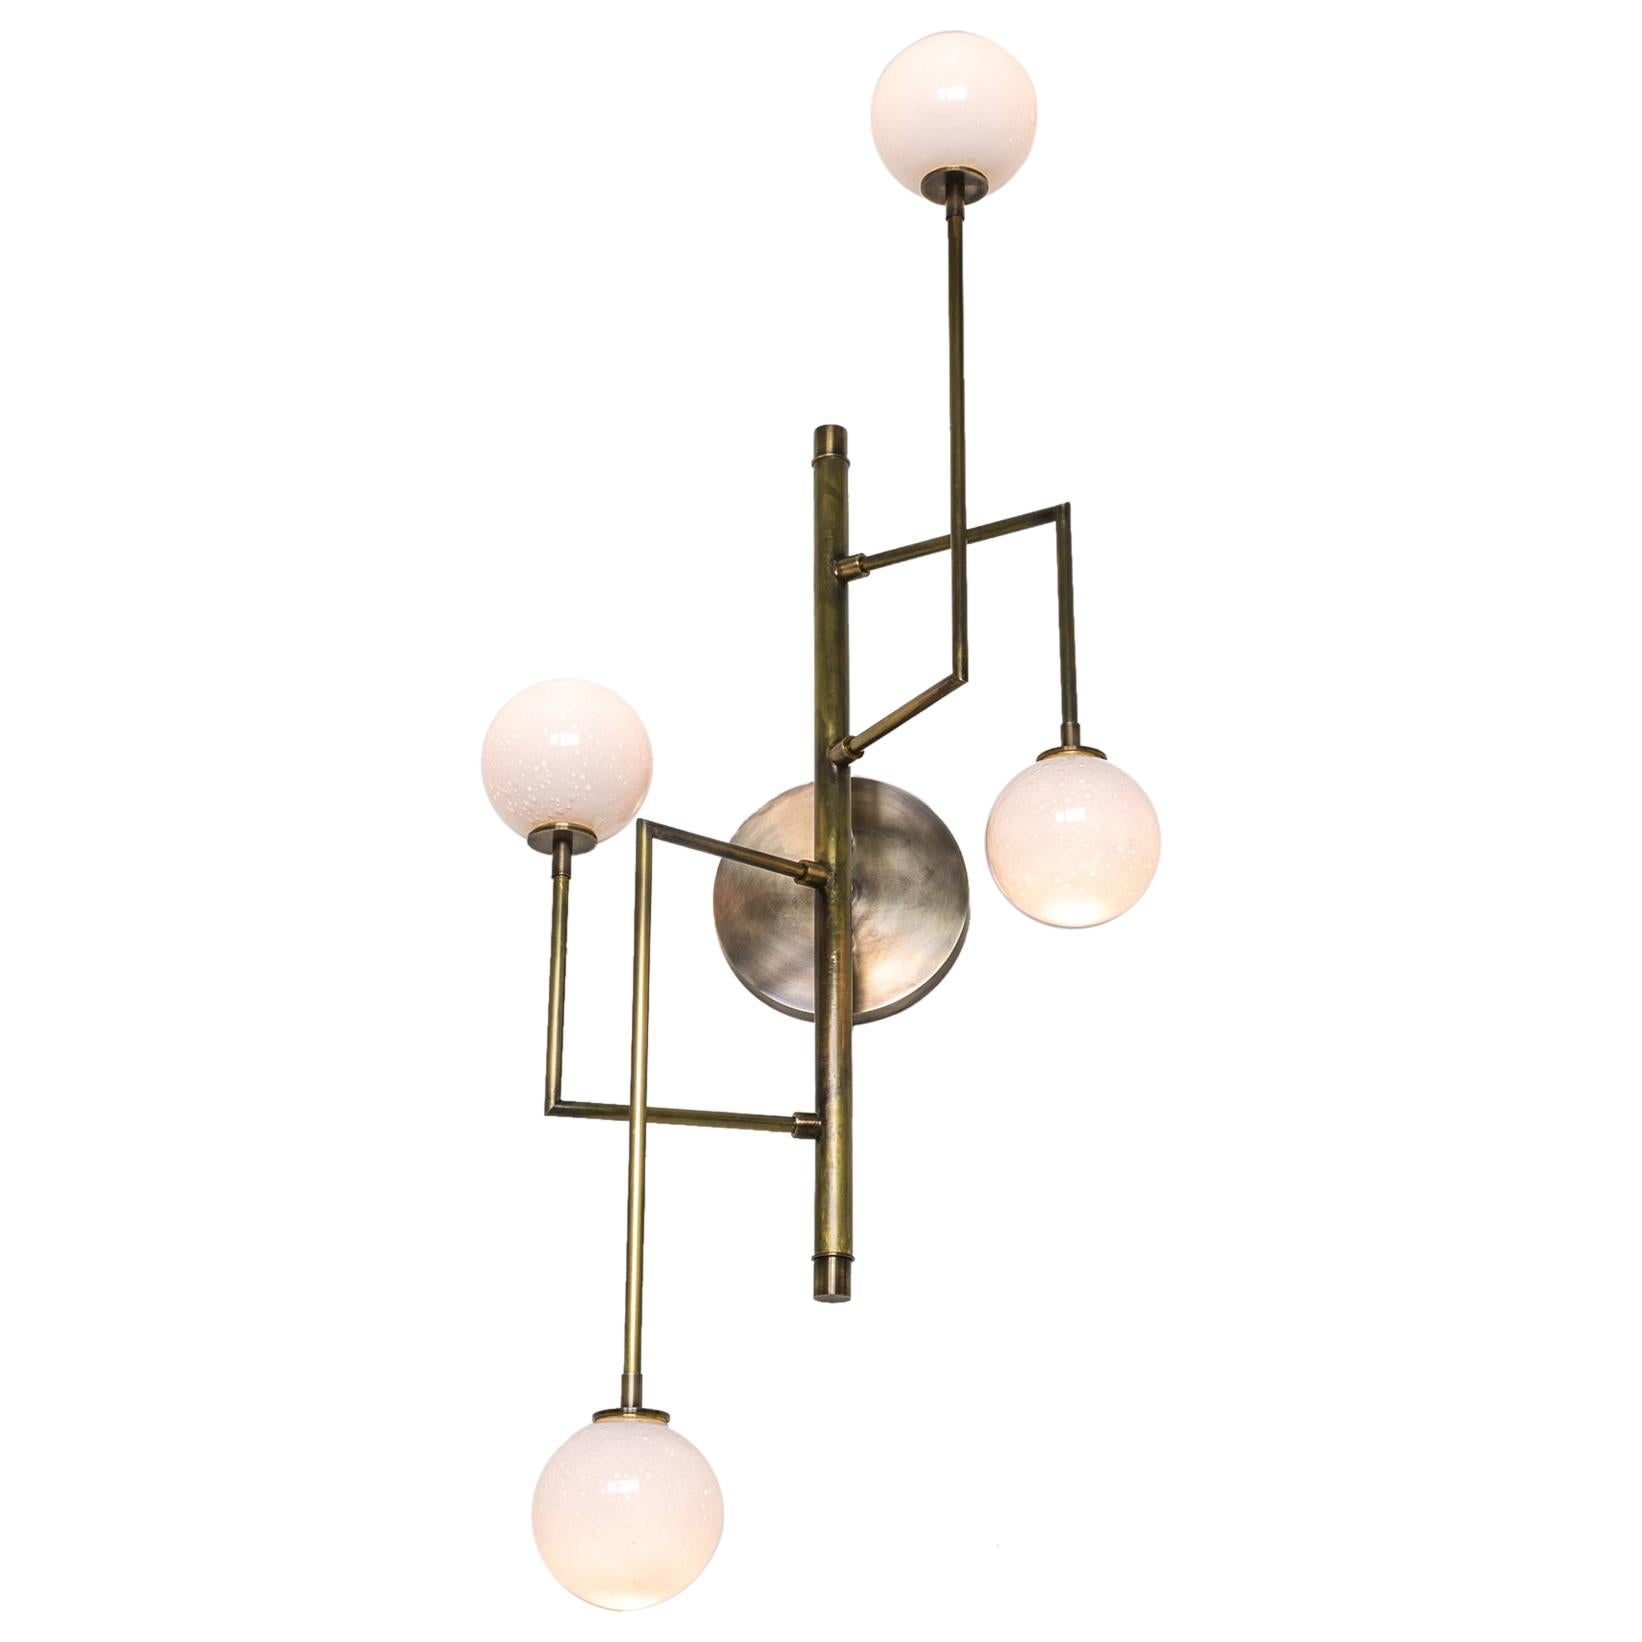 Halo Sconce 4, Brass, Hand Blown Glass Contemporary Wall Sconce, Kalin Asenov